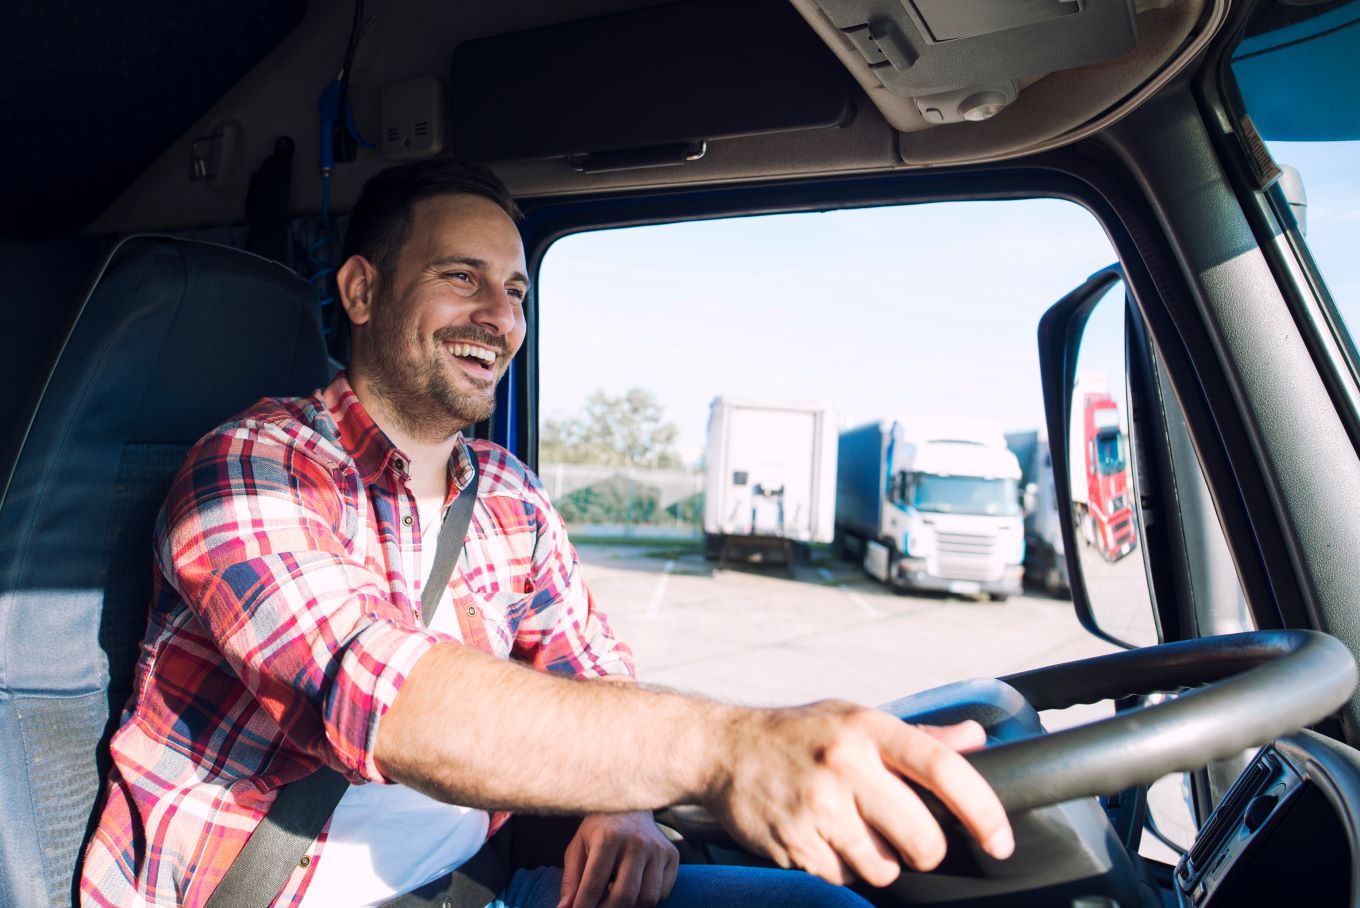 Finding the Perfect Gifts for the Truck Driver in Your Life